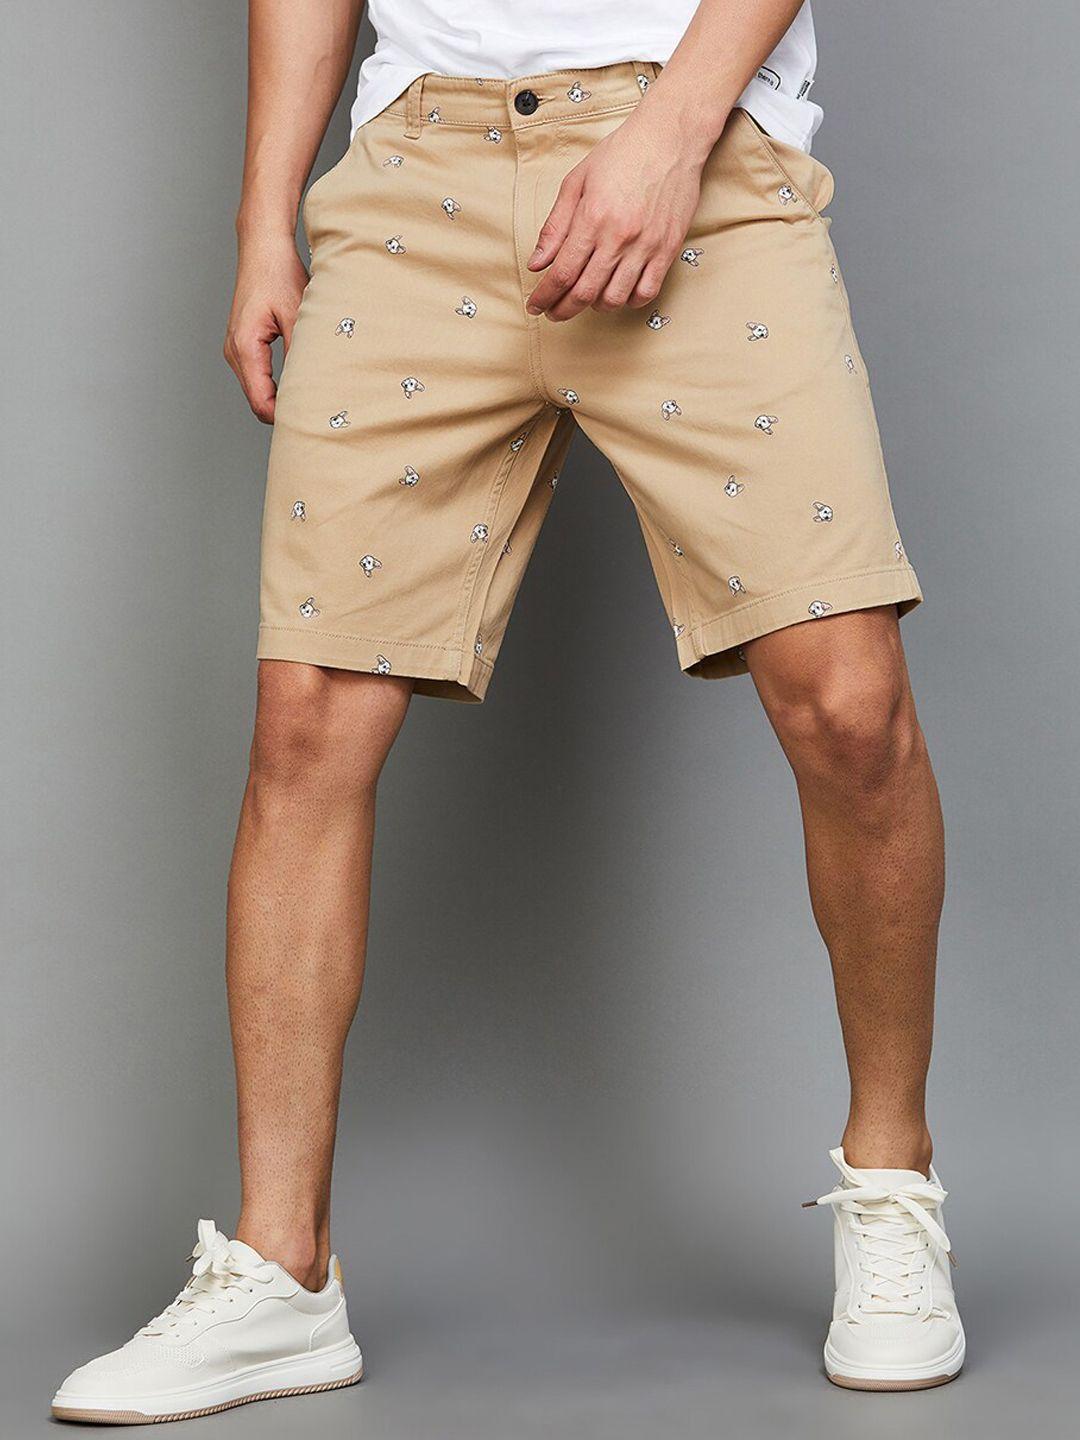 fame-forever-by-lifestyle-men-conversational-printed-mid-rise-shorts